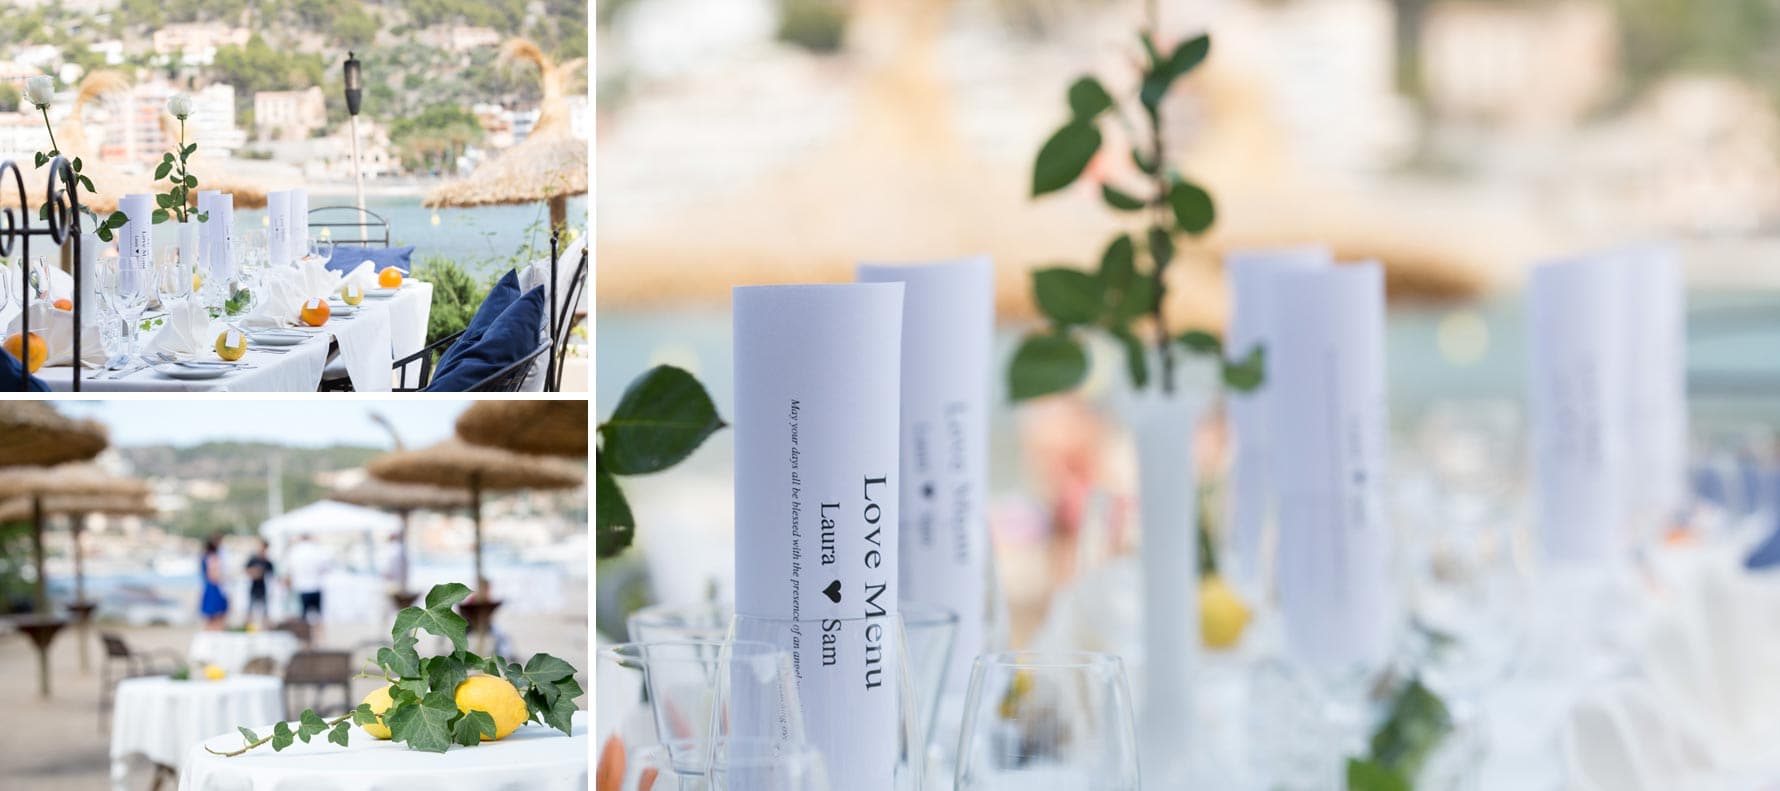 "The tables are laid" by Mallorca wedding photographer in Port de Soller